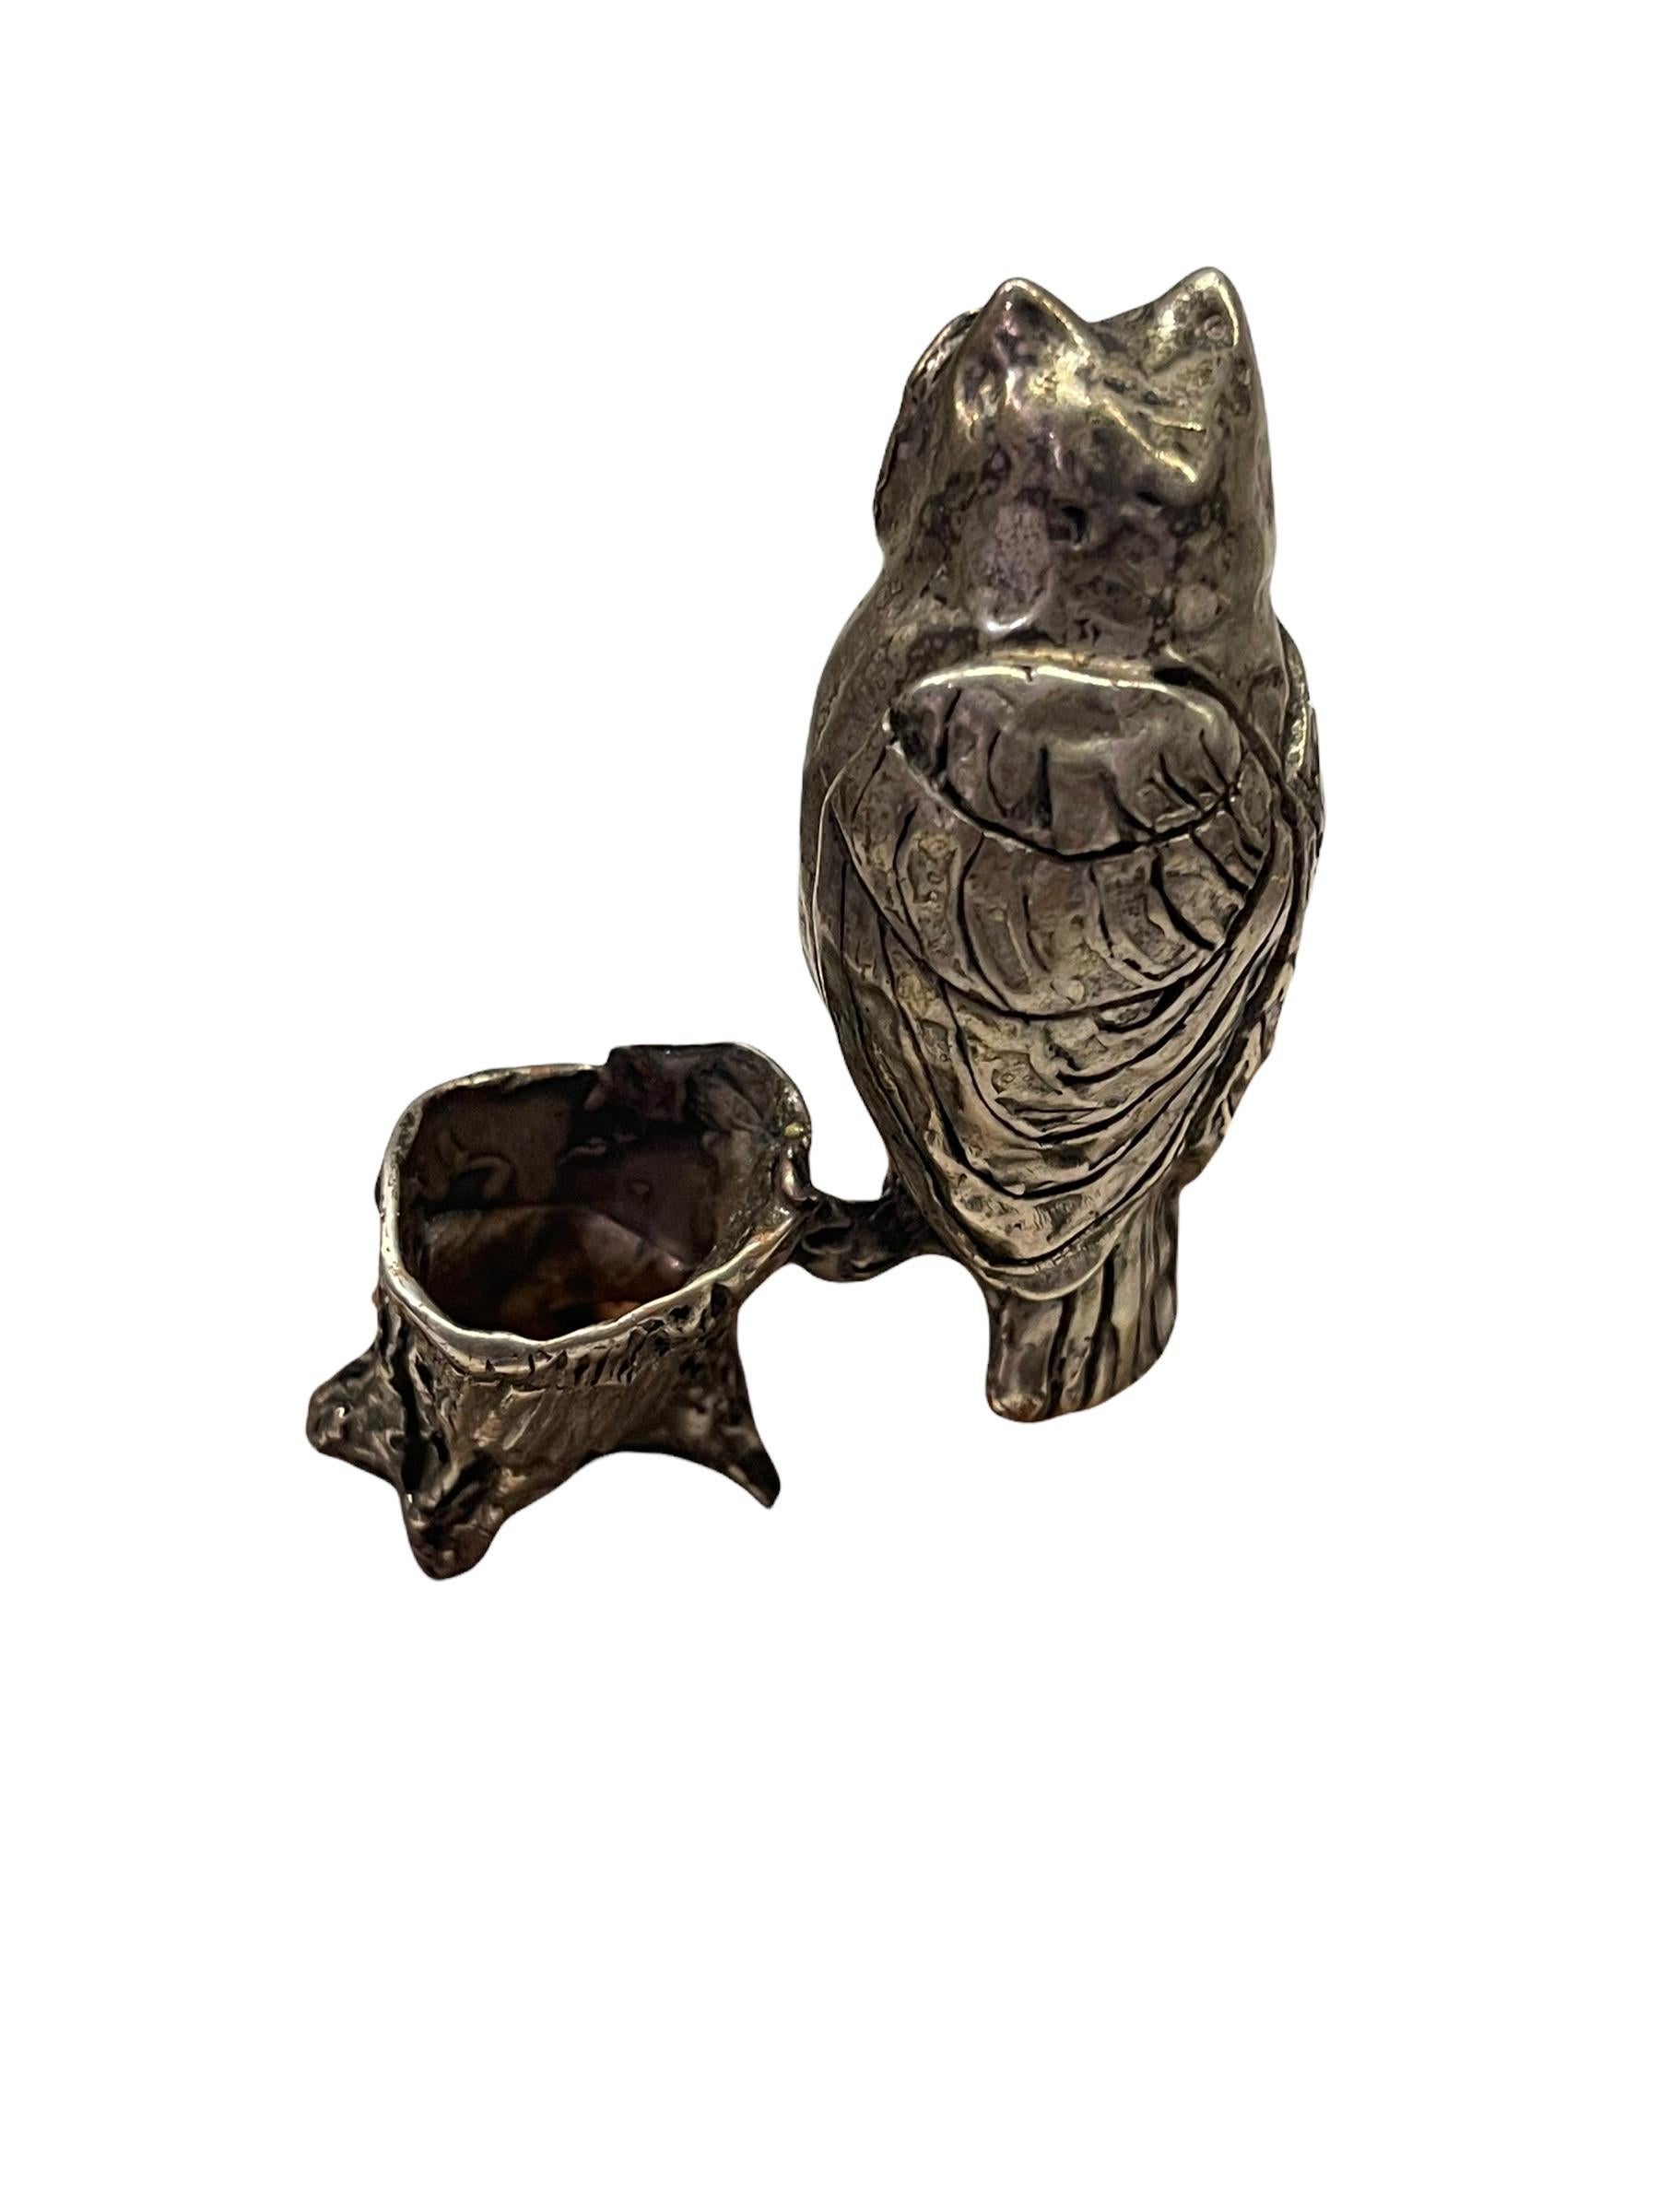 20th Century Cartier Sterling Silver Owl Figurine Perched on a Trunk. For Sale 2